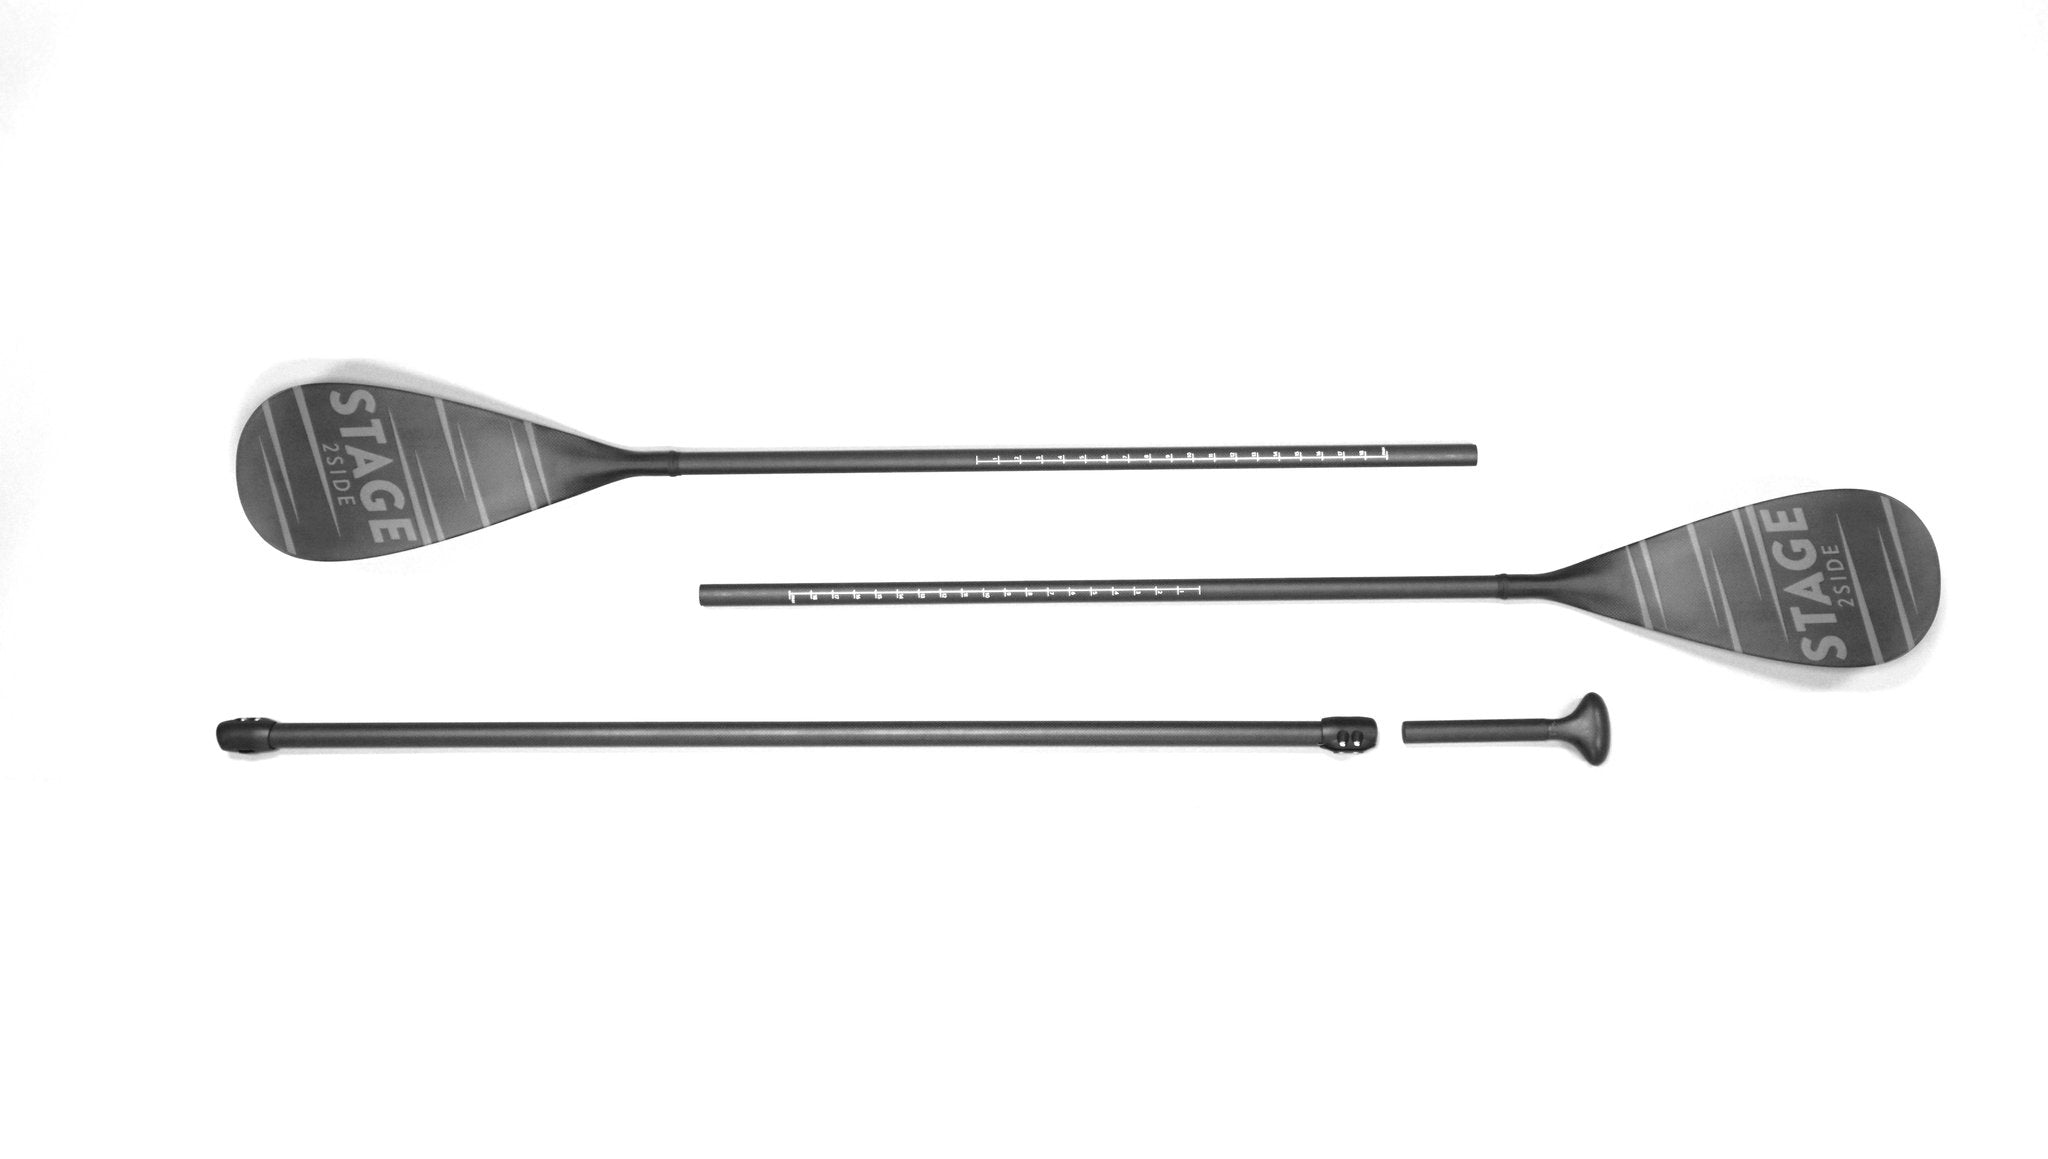 100% Carbon Fiber Composite Shaft reduces weight and adds stiffness 100% Carbon Fiber Blades. Double Paddle Adjusts between 112" to 156" to fit paddlers 5'2 to 6'3 Double Paddle Weighs 2 lbs., 6 oz. Singe Paddle Adjusts from 75 inches to over 90 inches in length! Single Paddle Weighs 1 lb., 11,5 oz.